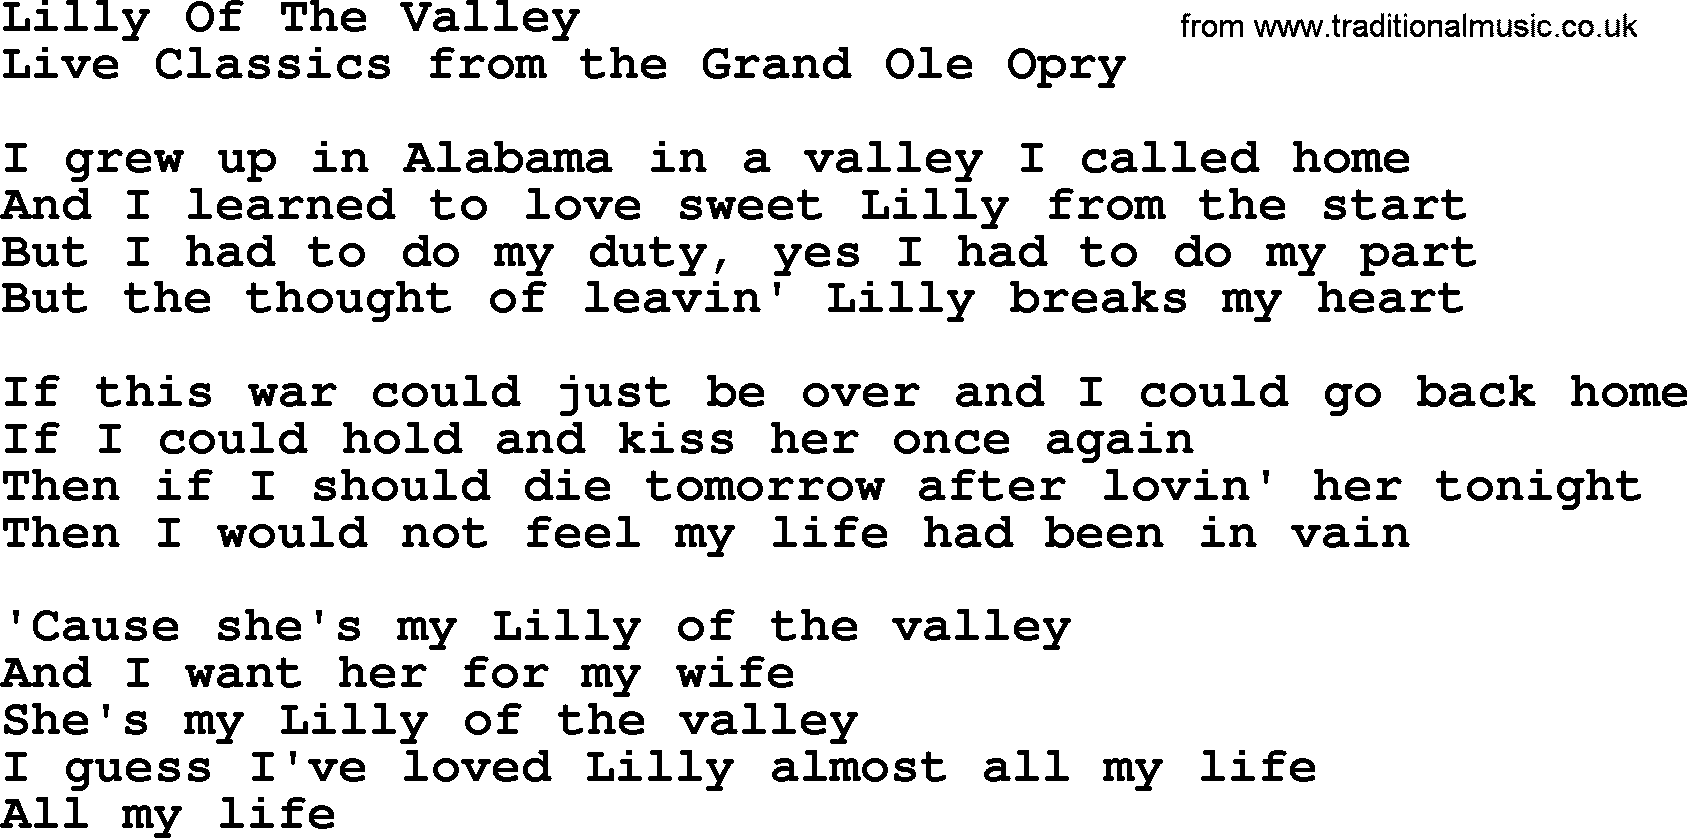 Marty Robbins song: Lilly Of The Valley, lyrics